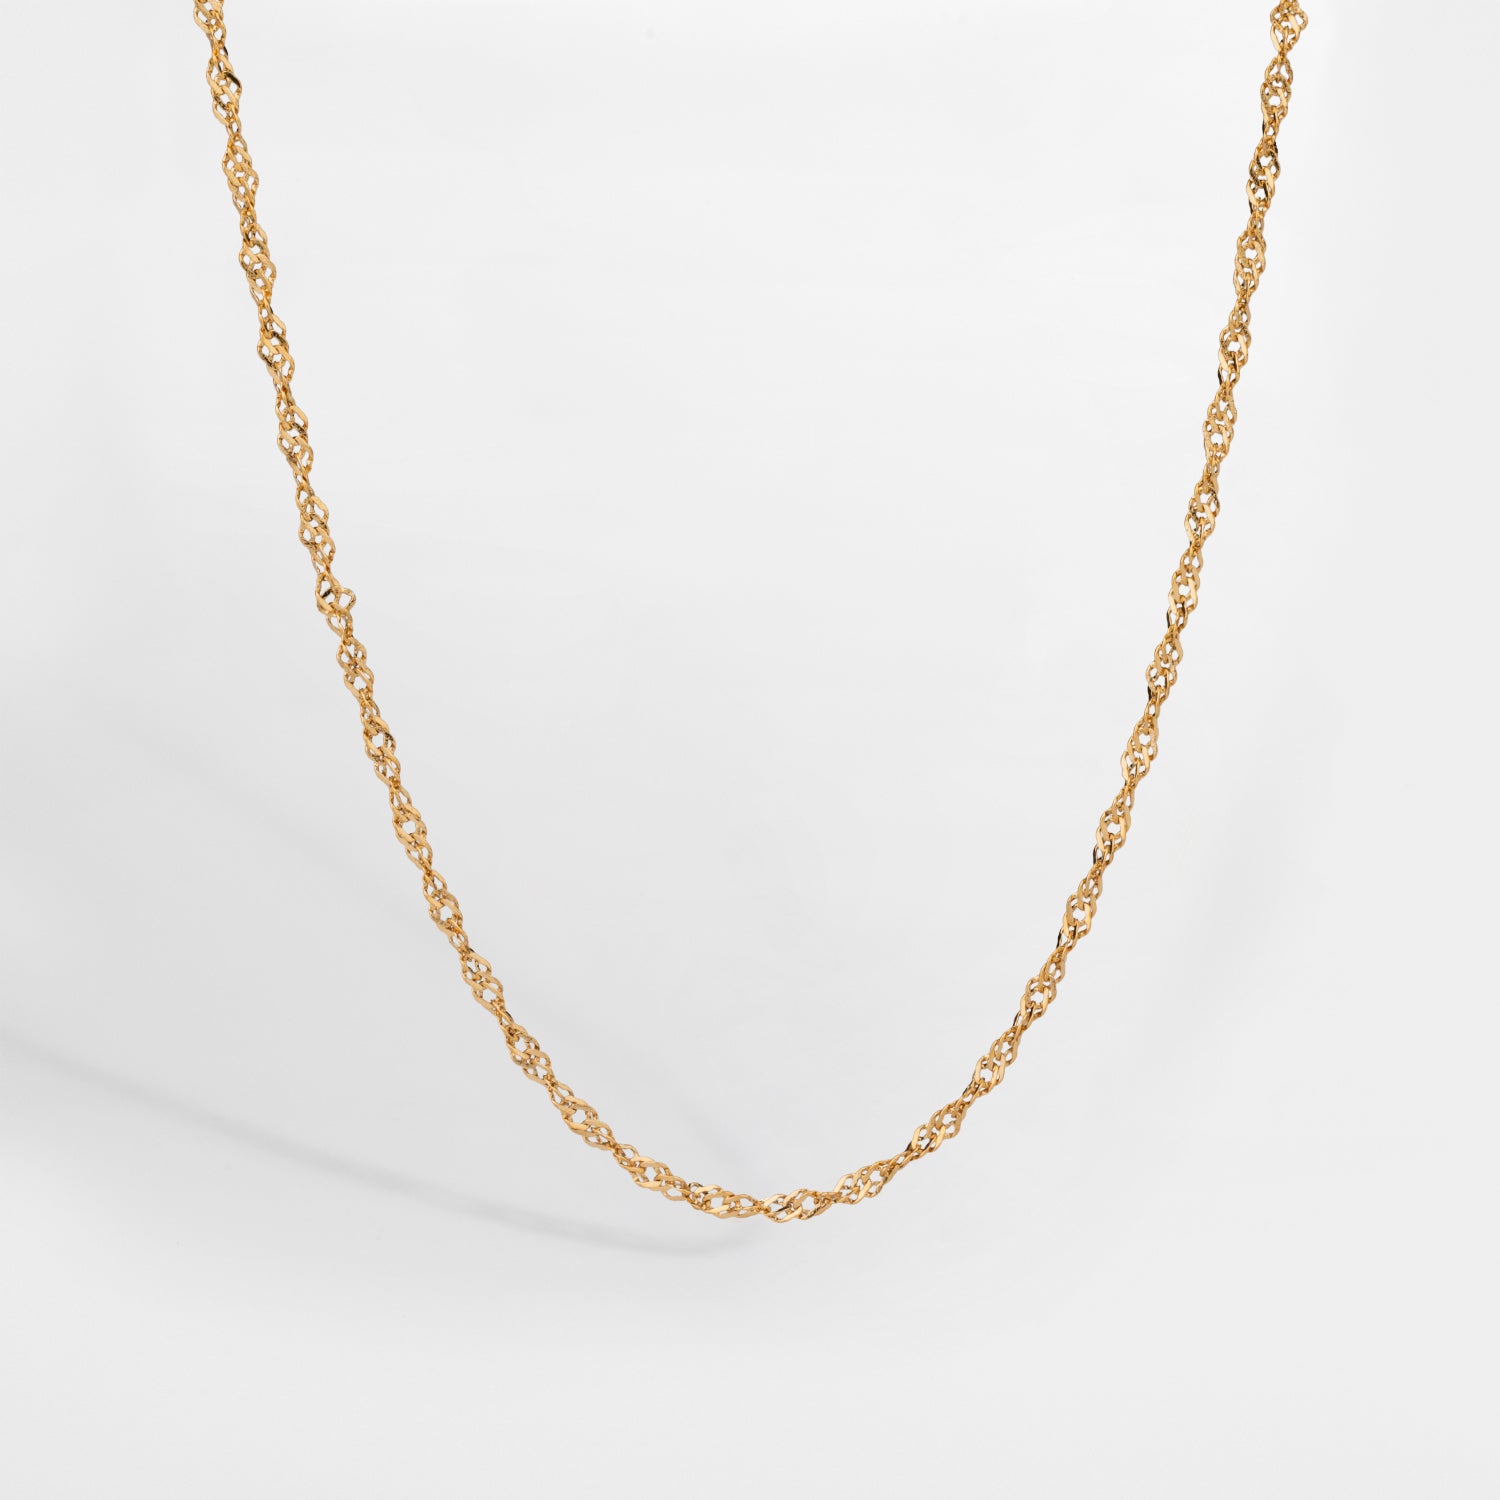 NL Vintage chain - Gold-toned